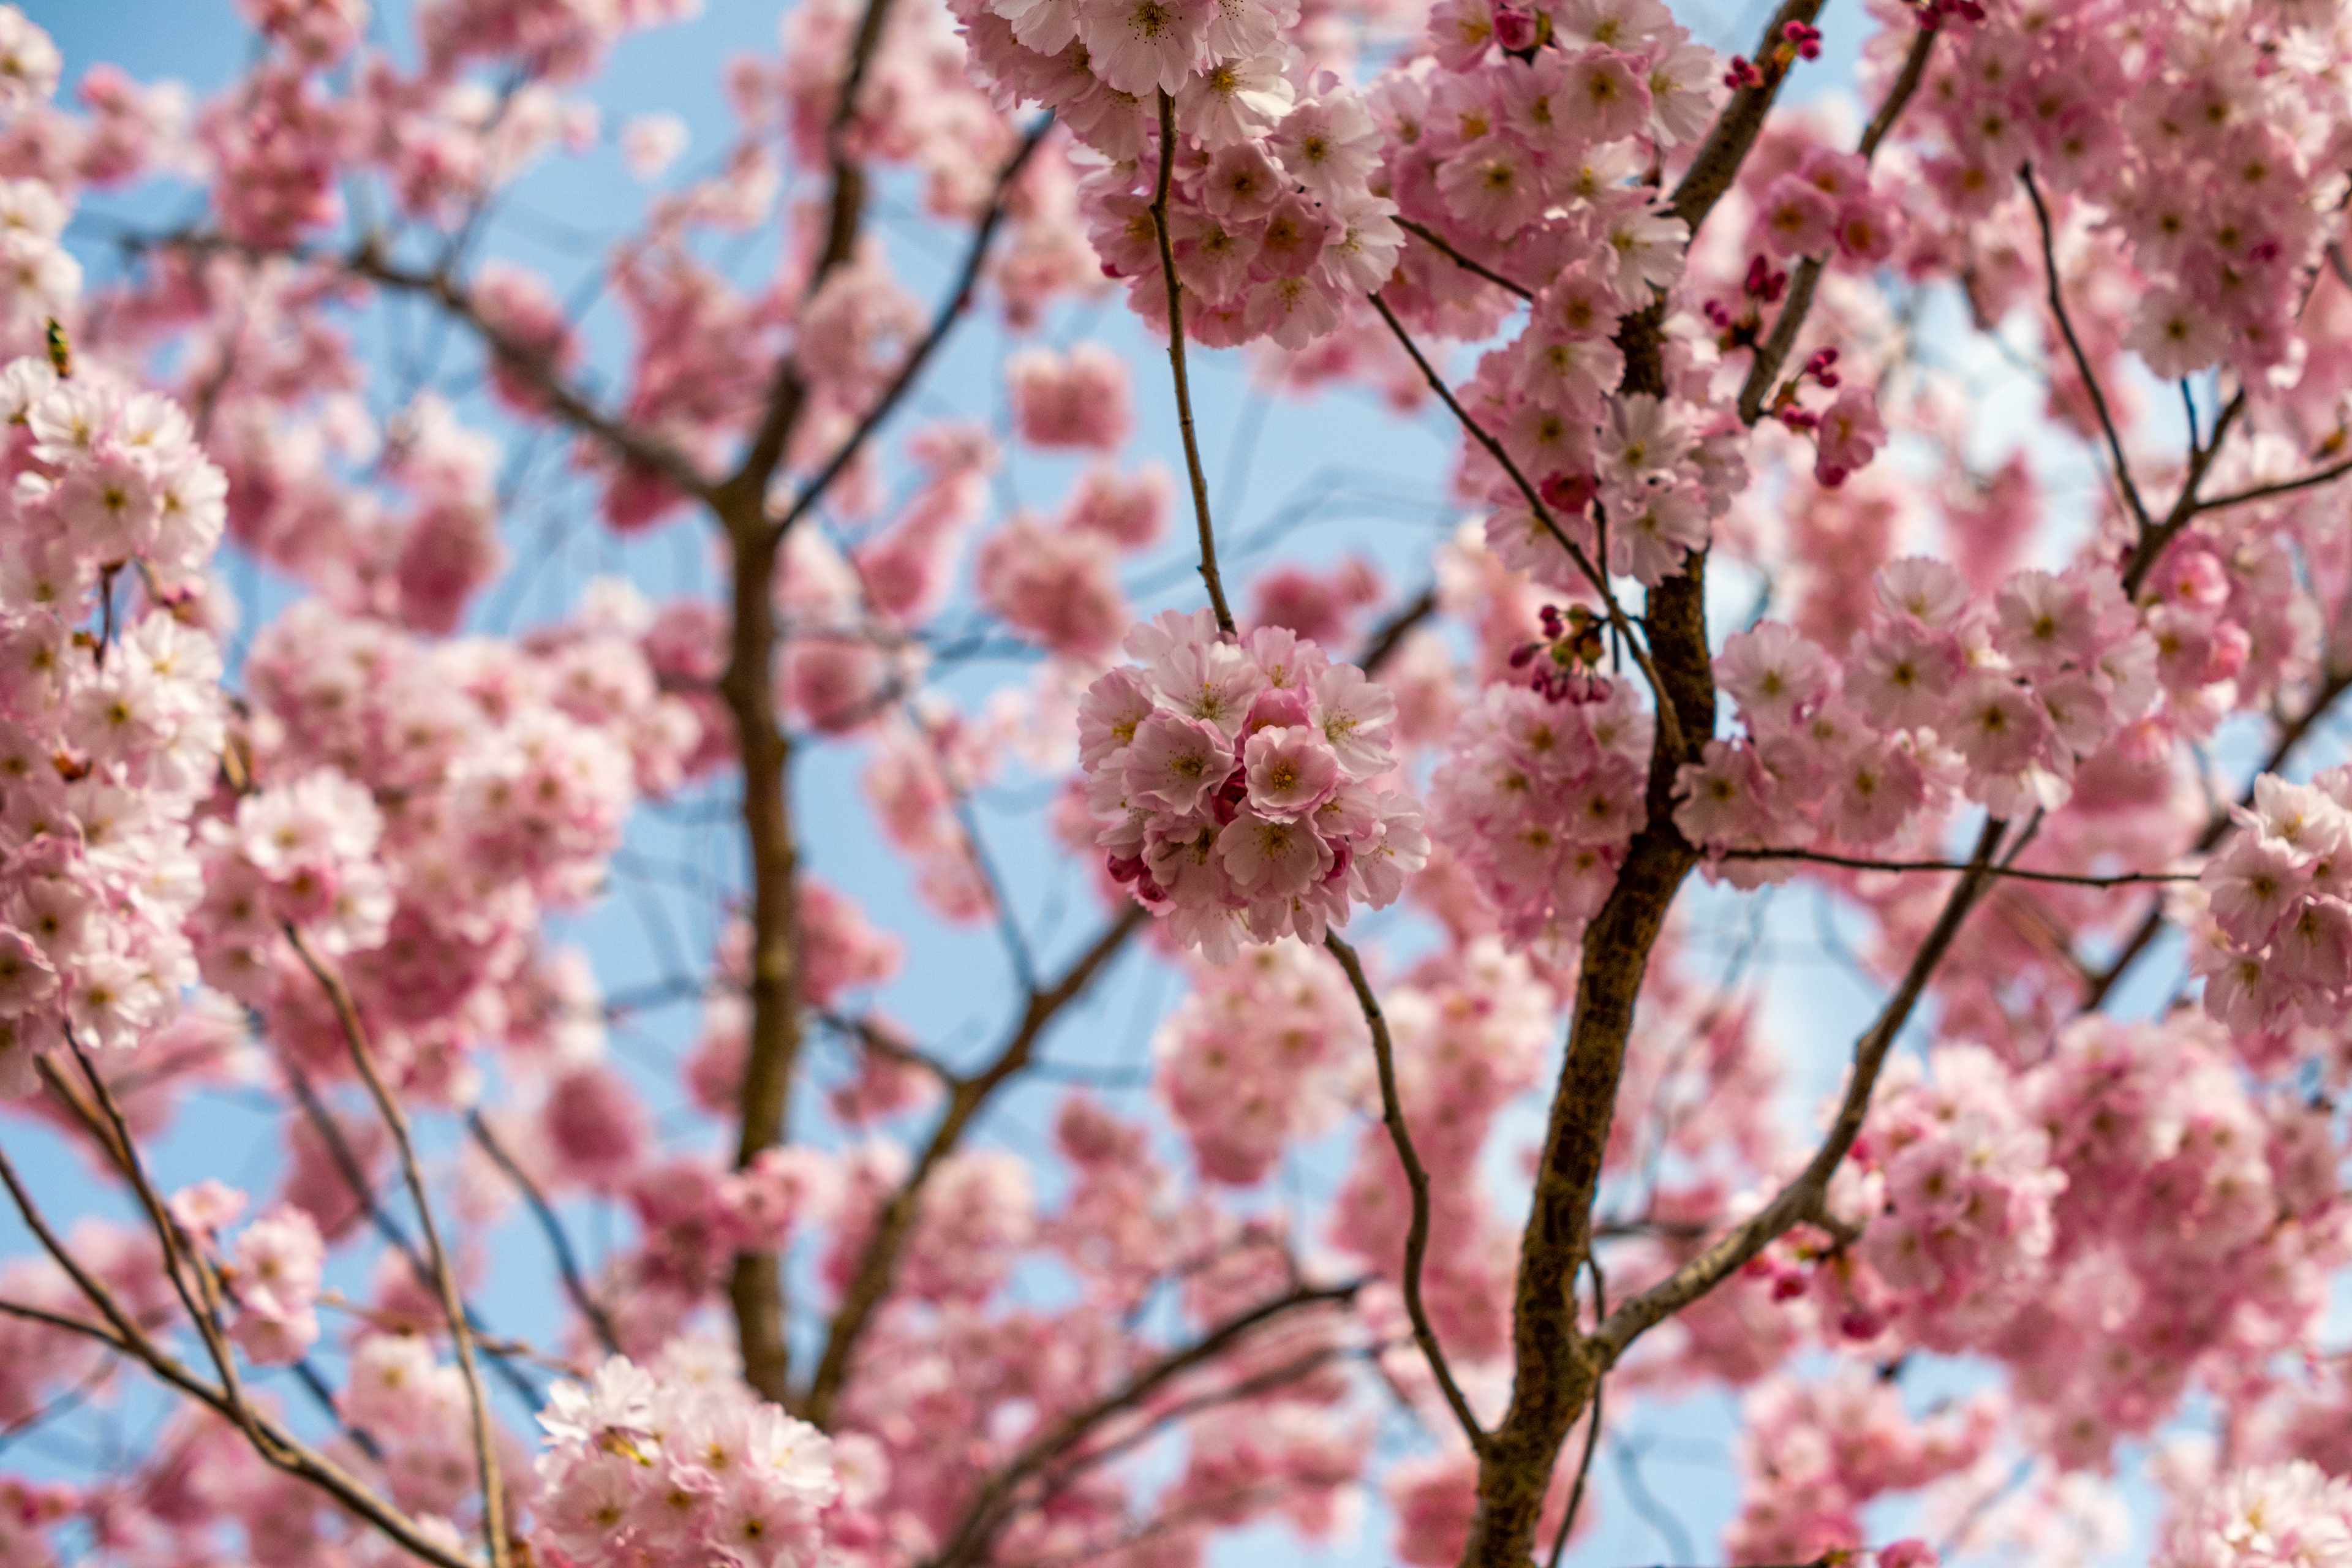 General 3840x2560 spring flowers cherry blossom plants closeup branch trees